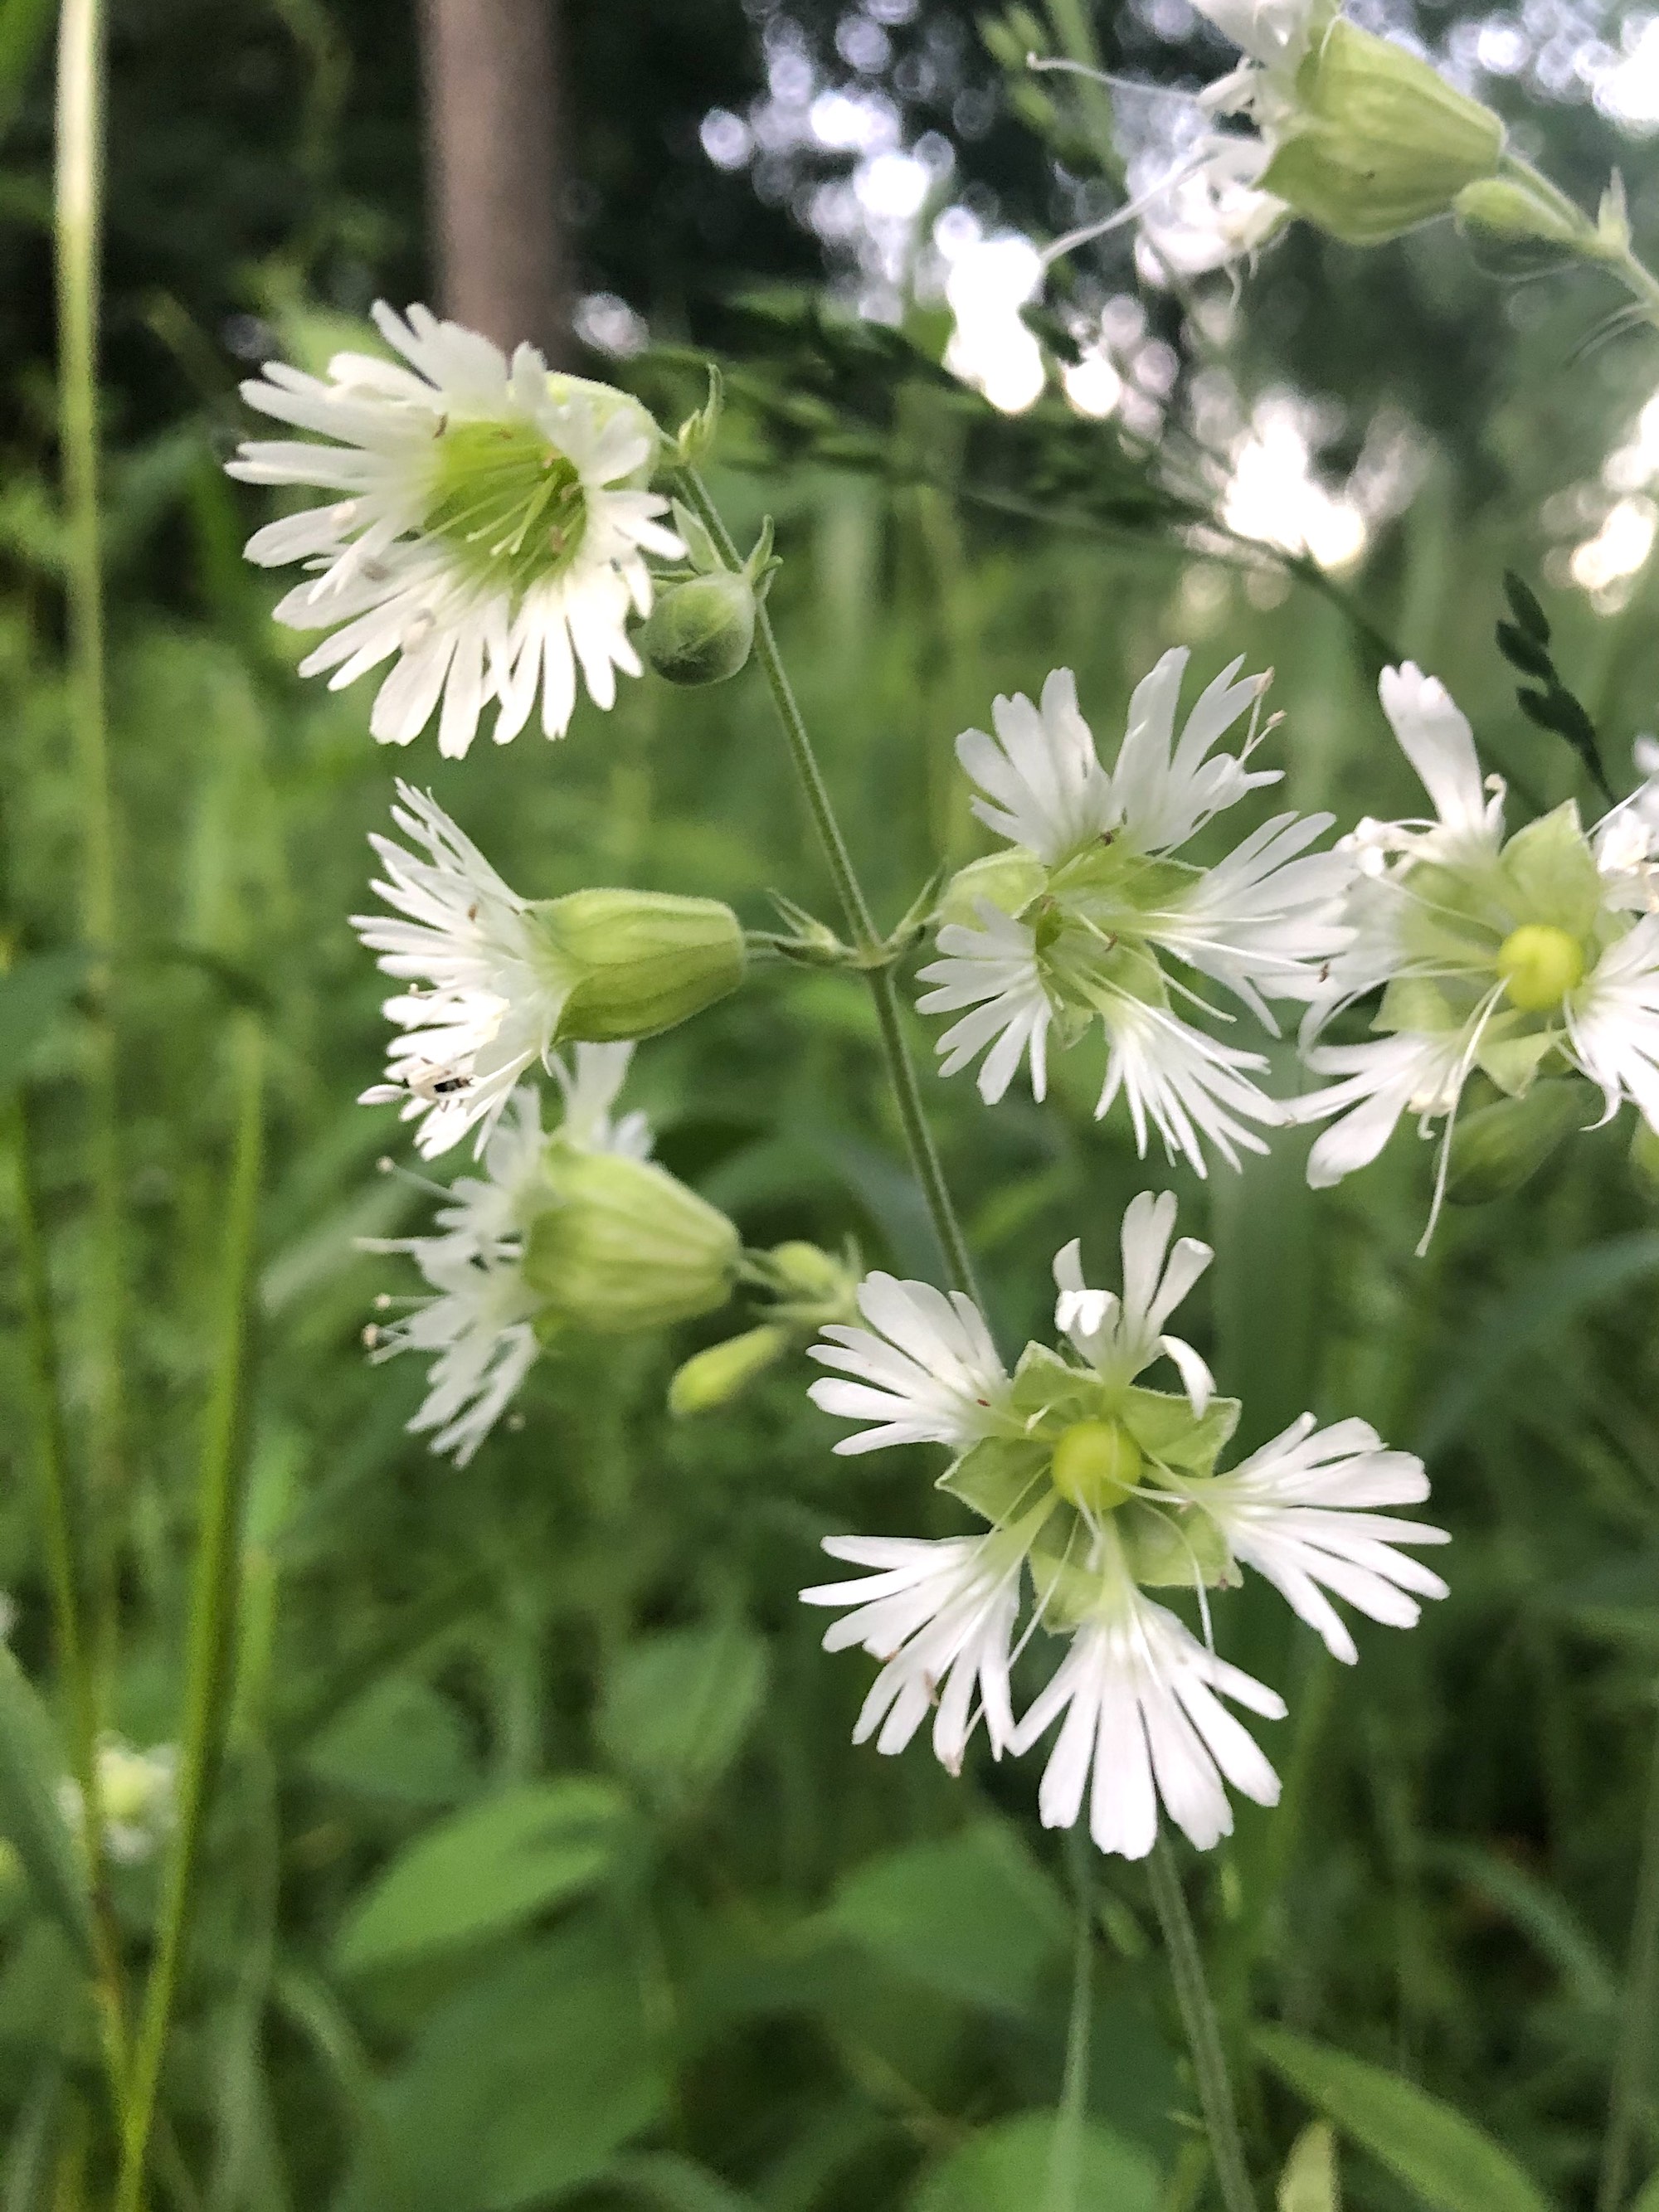 Starry Campion in Nakoma Park on July 16, 2020 in Madison, Wisconsin.